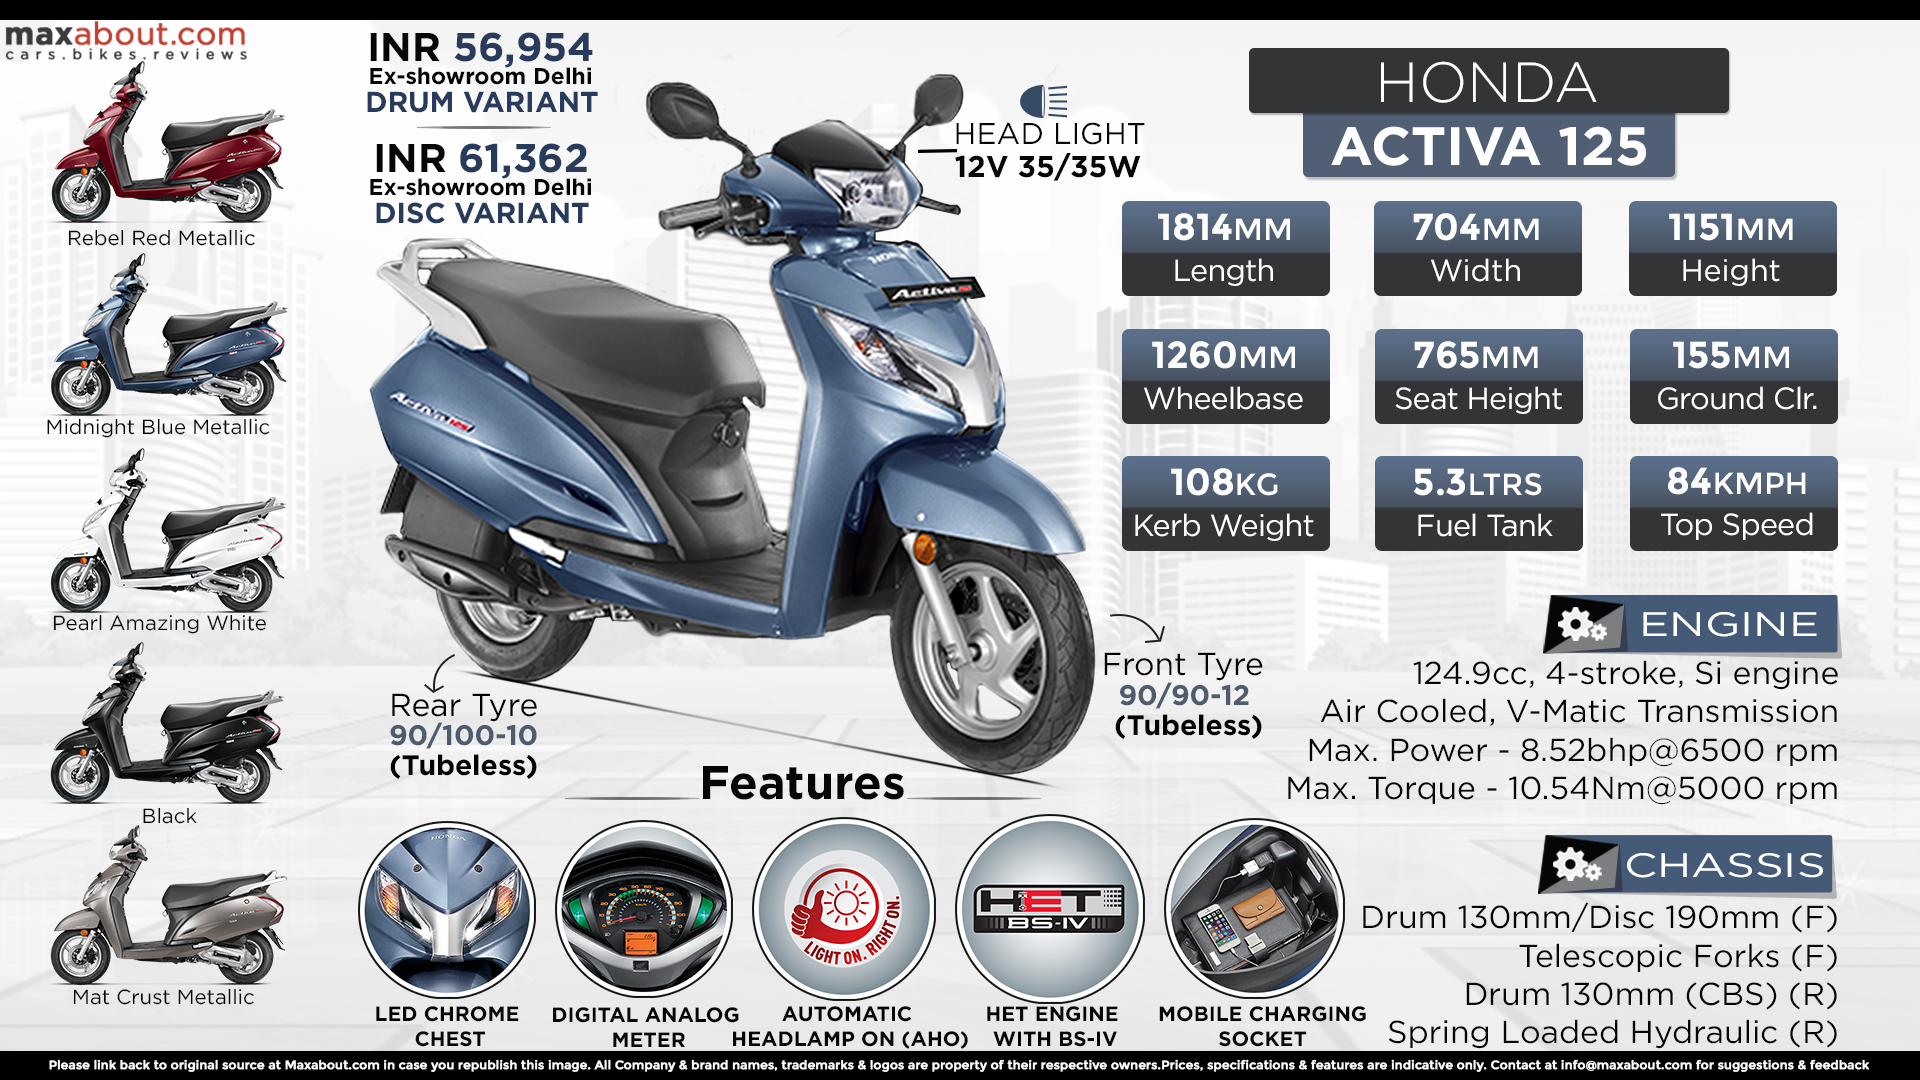 Quick Facts About Honda Activa